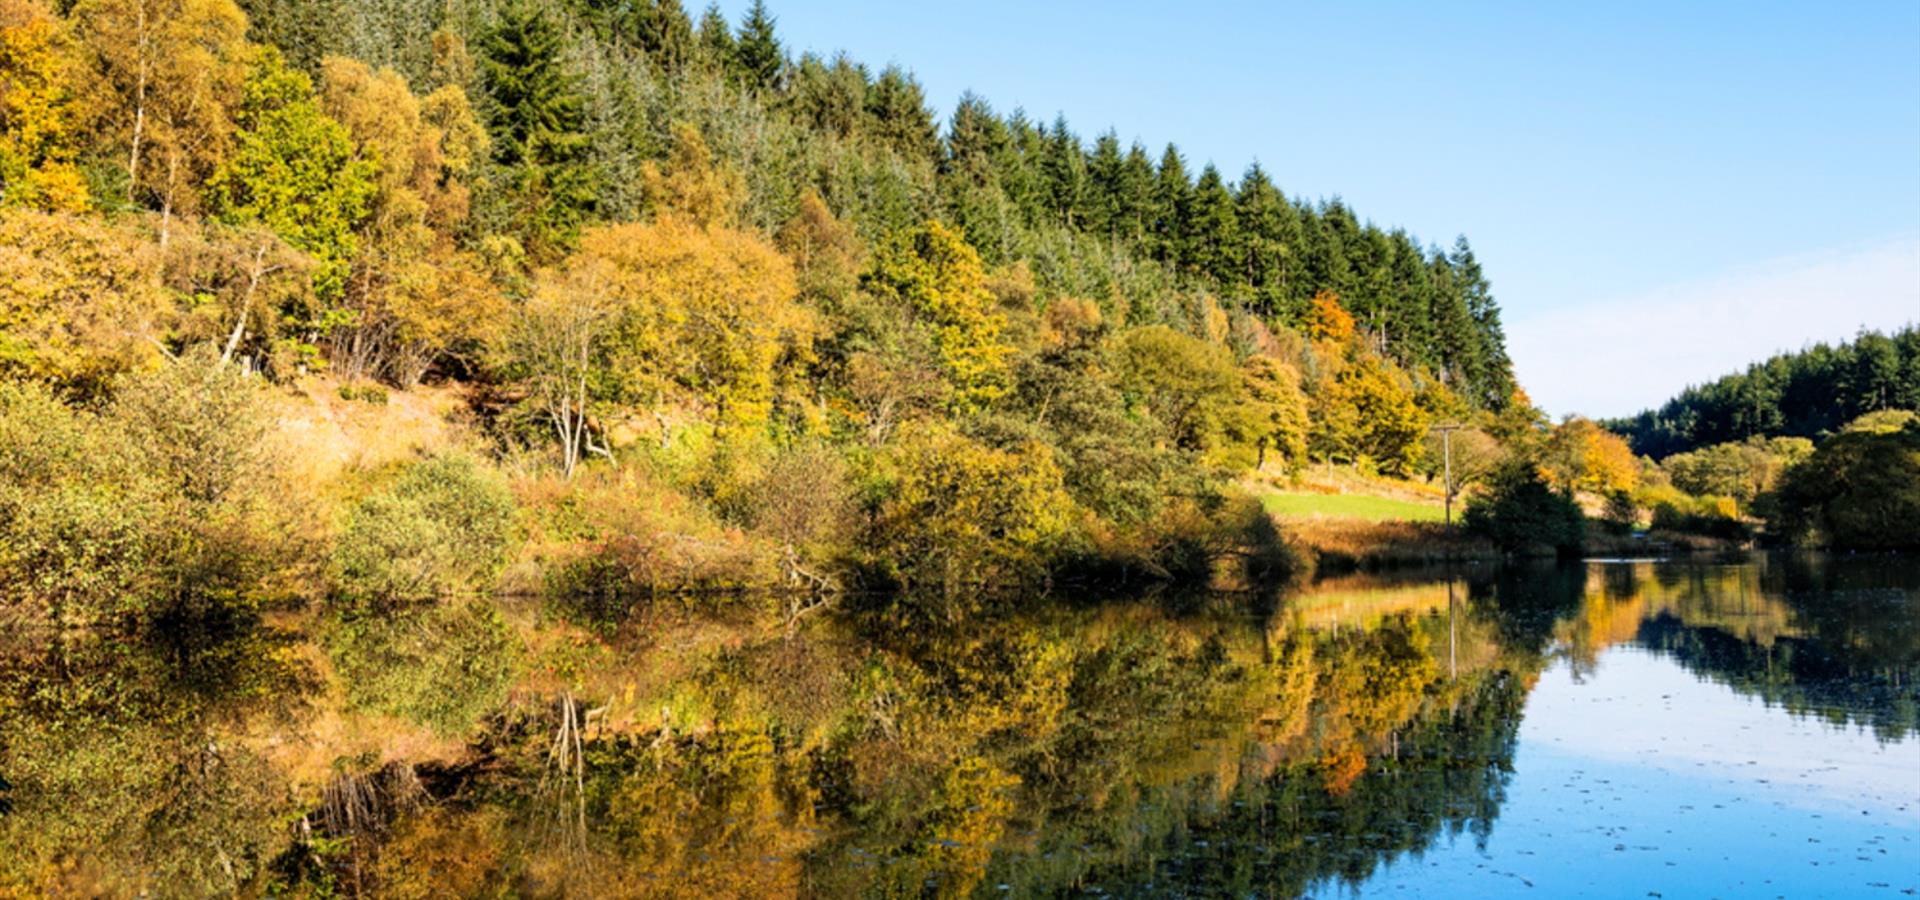 An image of Dalby Forest and water reflection by Richard Burdon